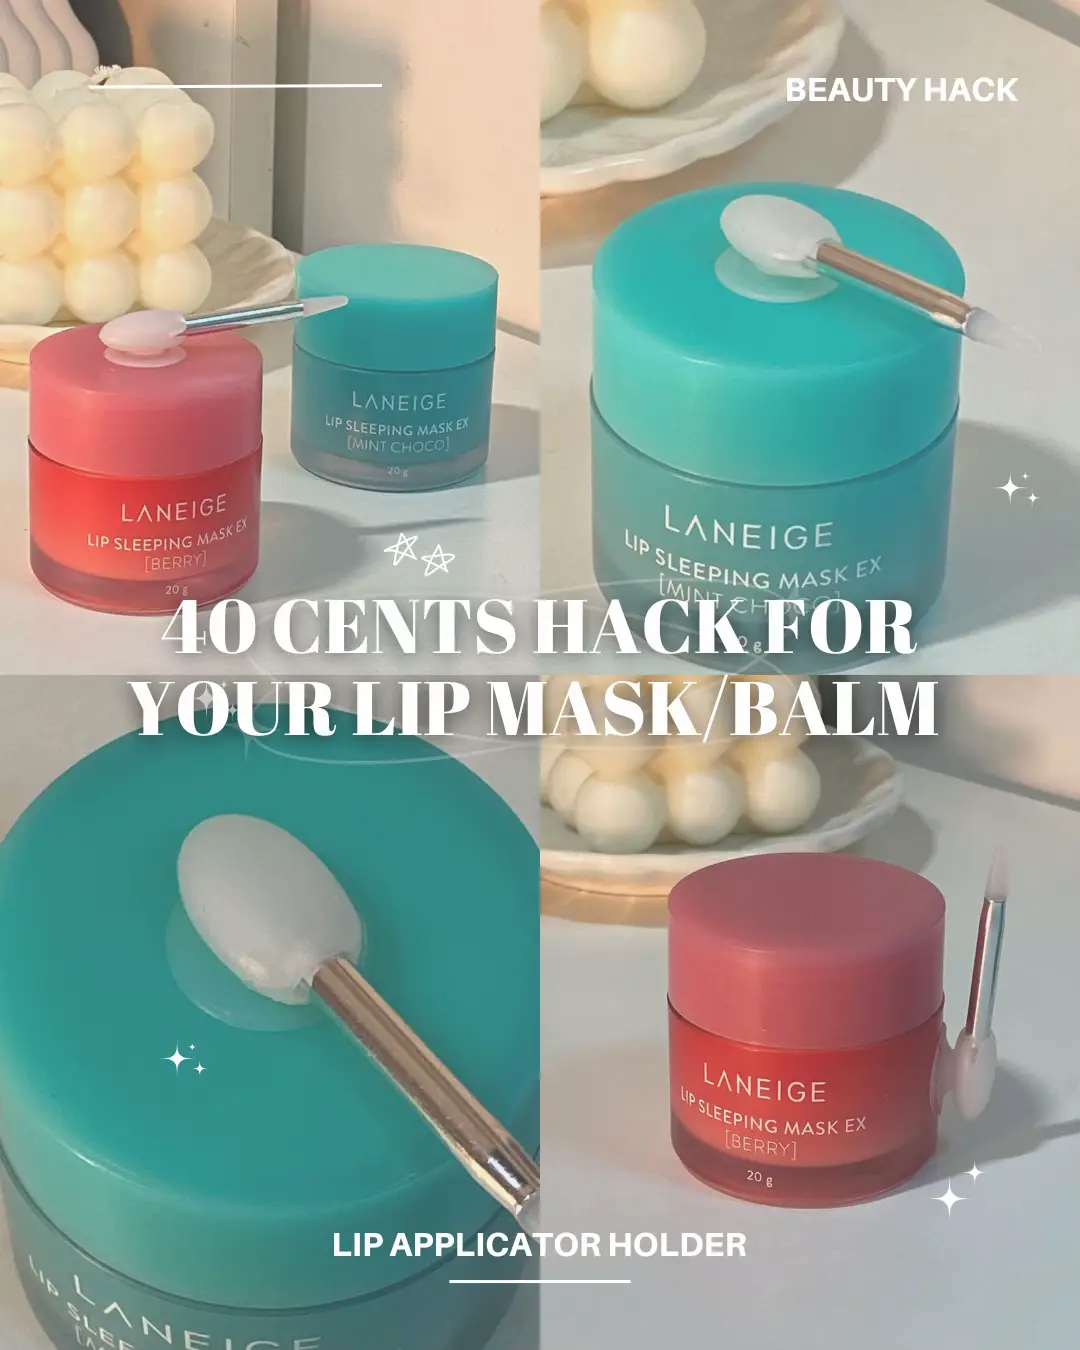 40¢ Hack To Never Lose Your Lip Applicator Again's images